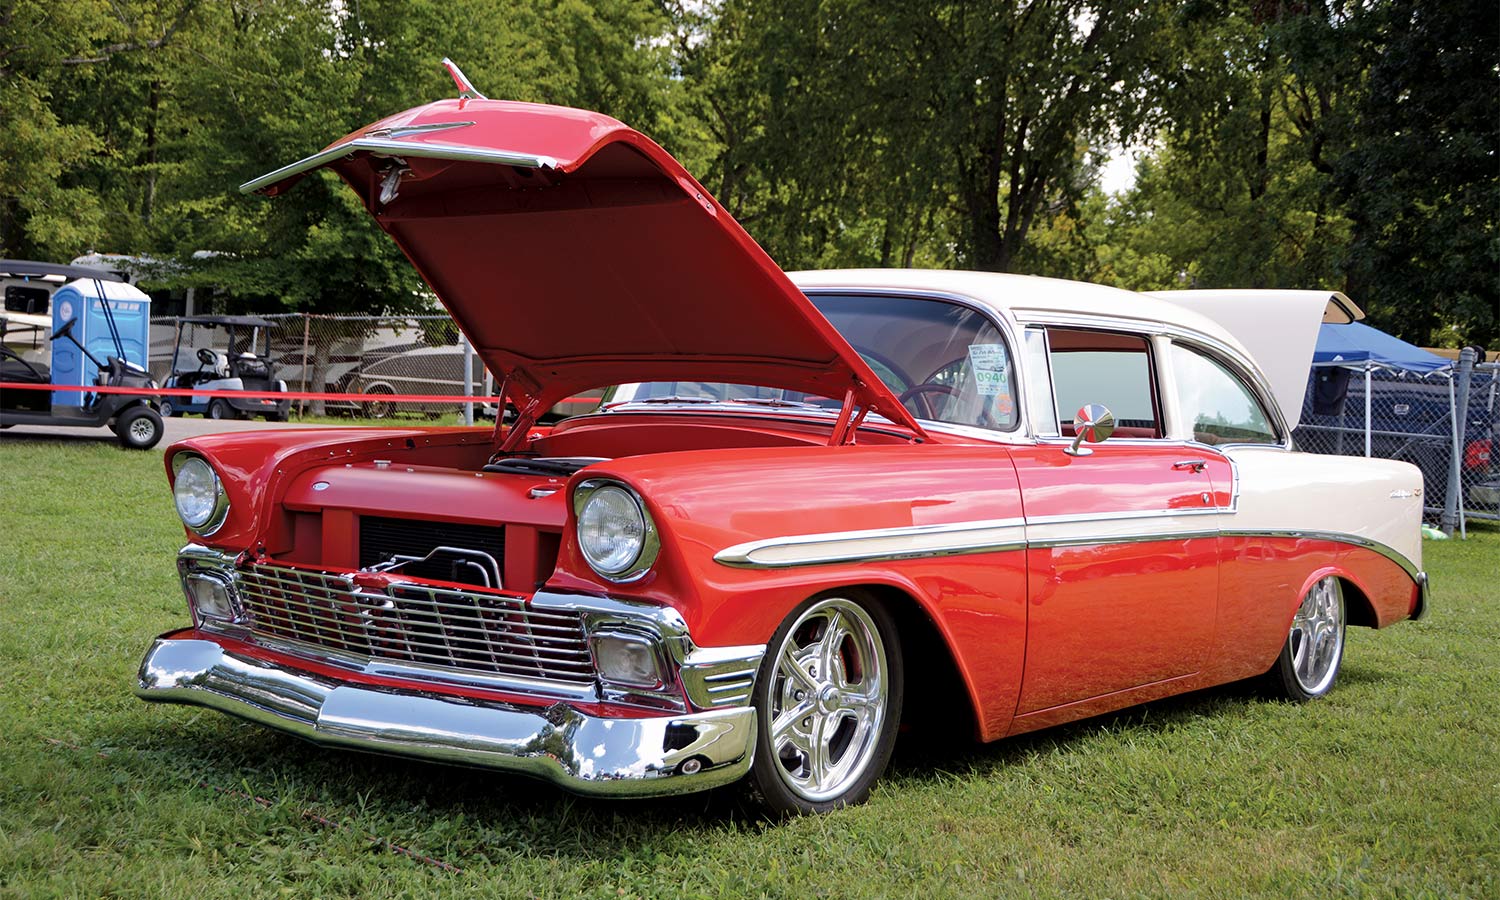 Rick Talbot's red and white ’56 Bel Air